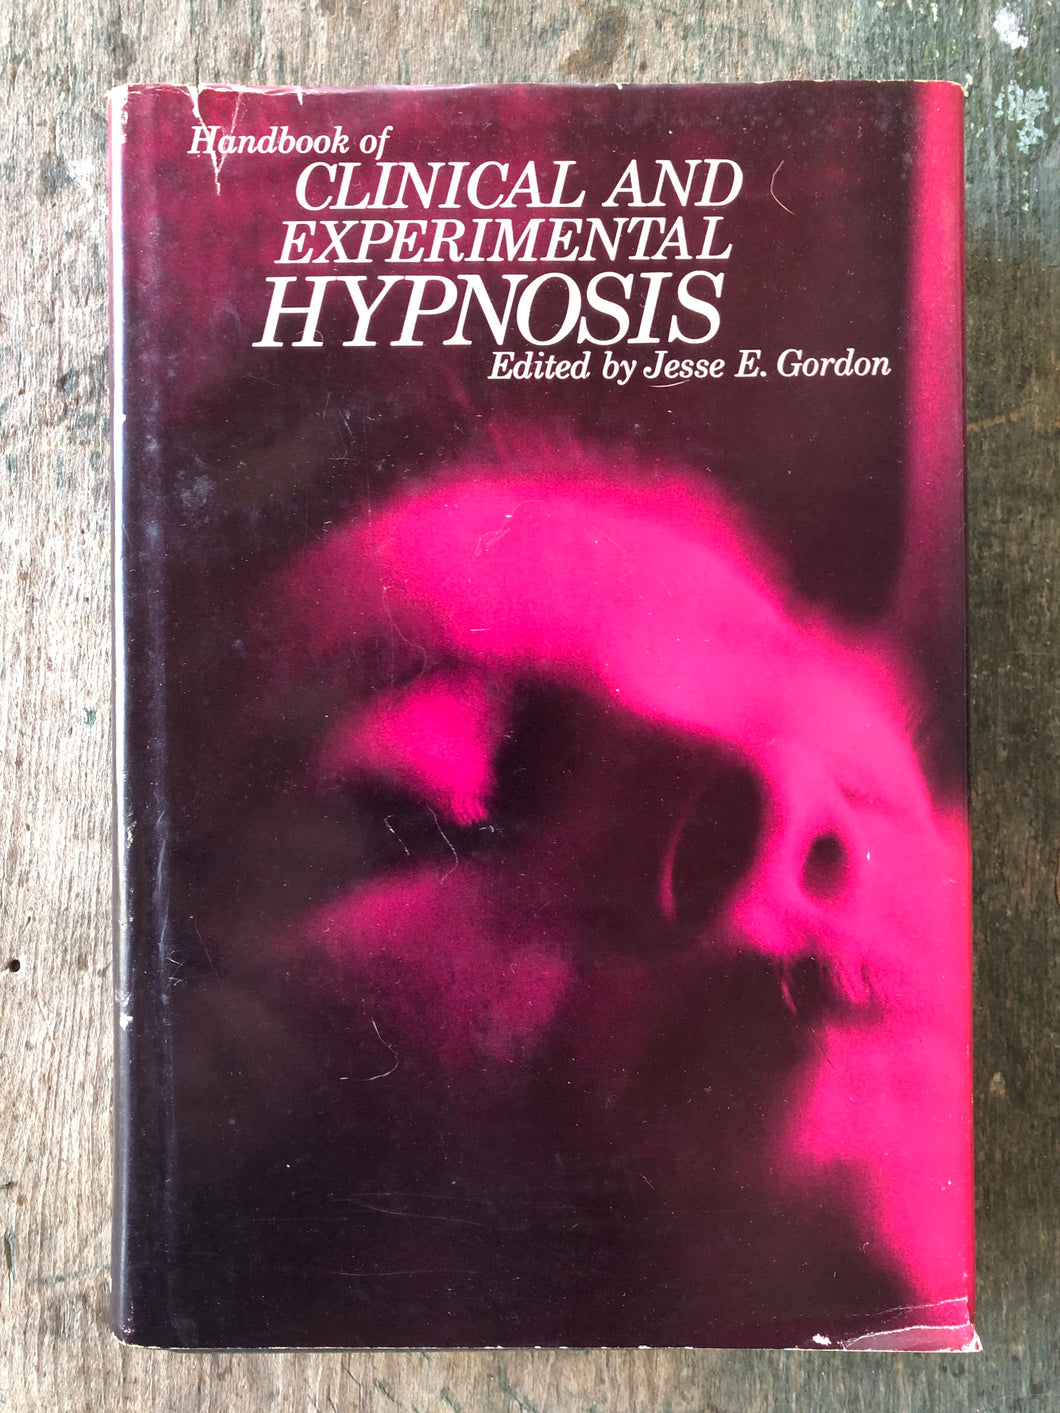 Handbook of Clinical and Experimental Hypnosis. Edited by Jesse E. Gordon